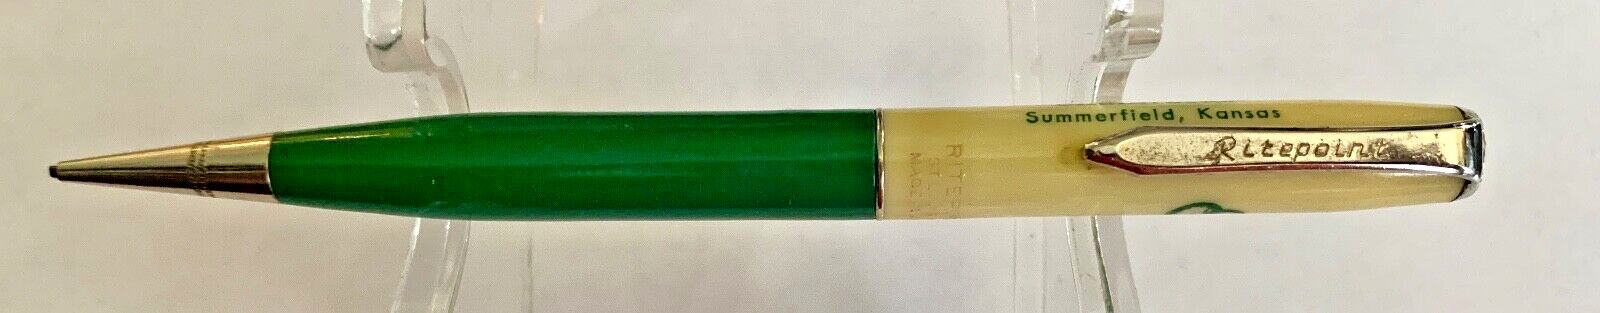 VINTAGE RITEPOINT 120 ADVERTISING MECHANICAL PENCIL, GREEN/WHITE W/ CHROME, 60'S